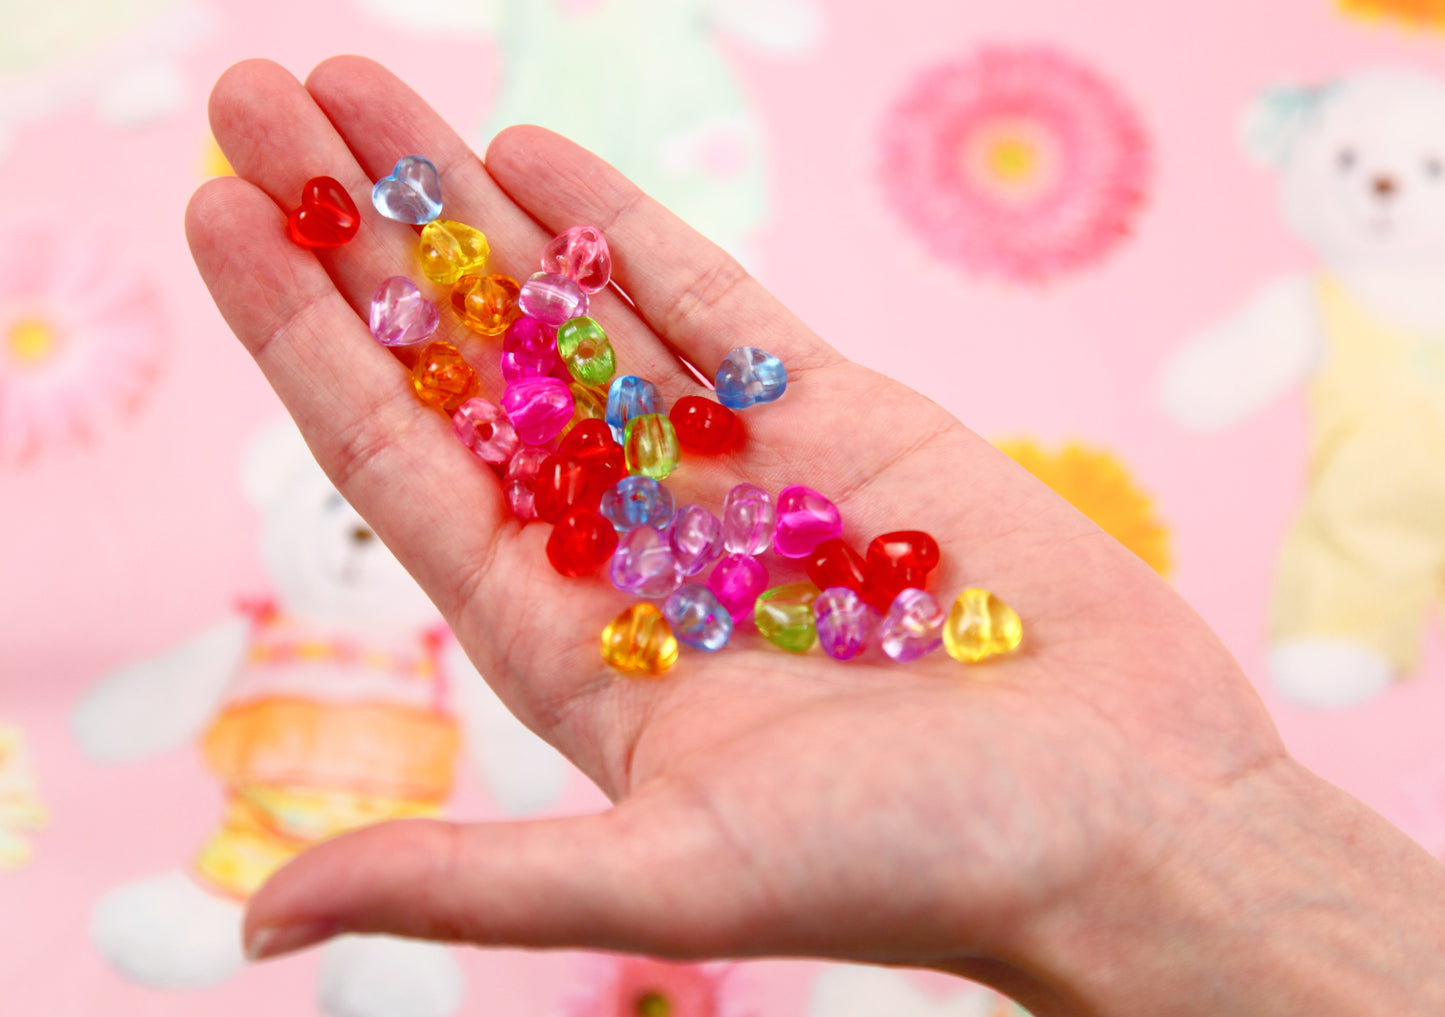 Heart Beads - 8mm Tiny Translucent Heart Beads Resin or Acrylic Beads, mixed color, small size beads - 150 pc set